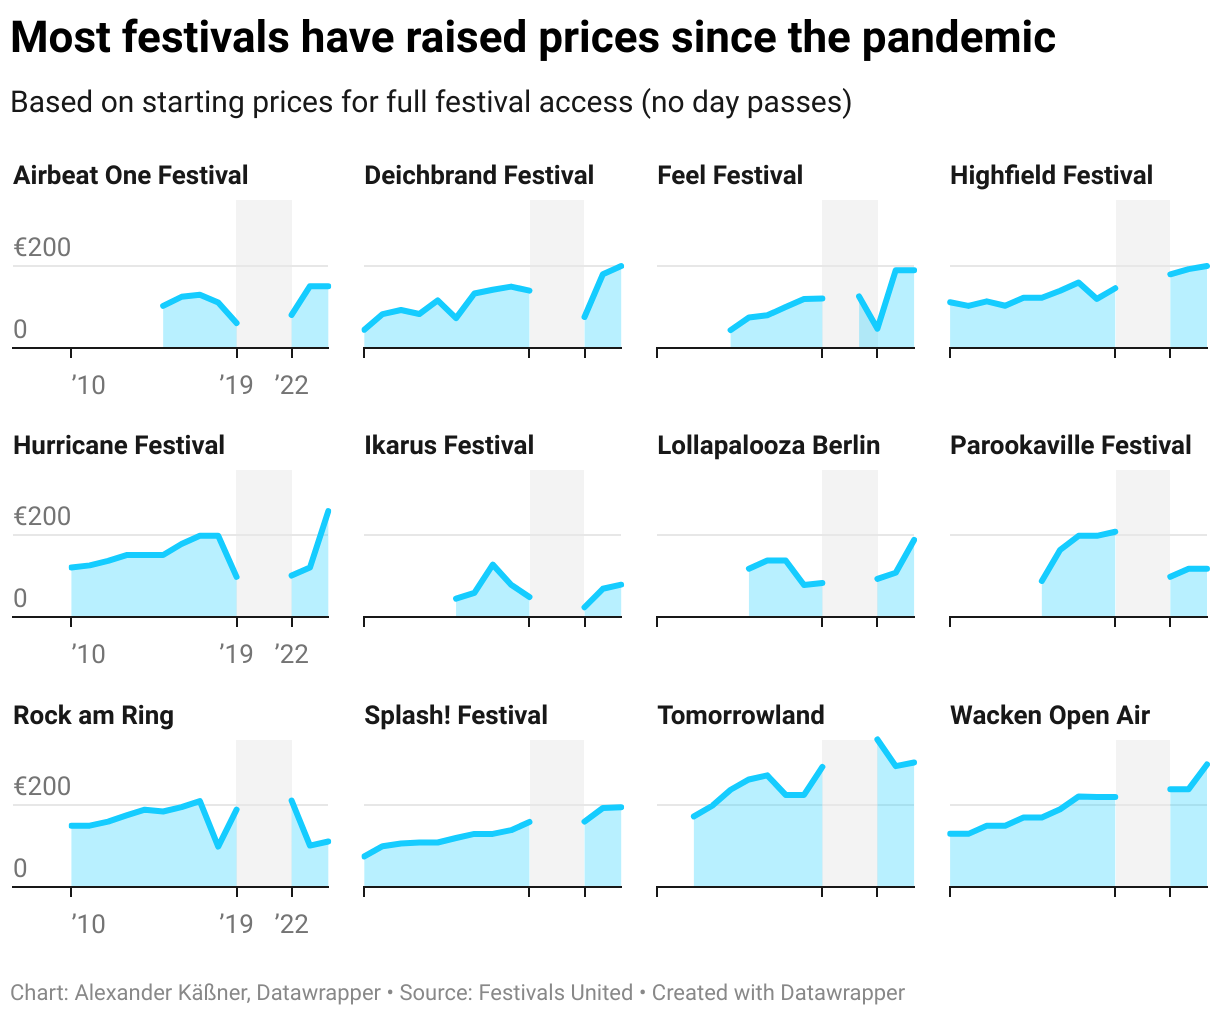 Most festivals have raised prices since the pandemic 